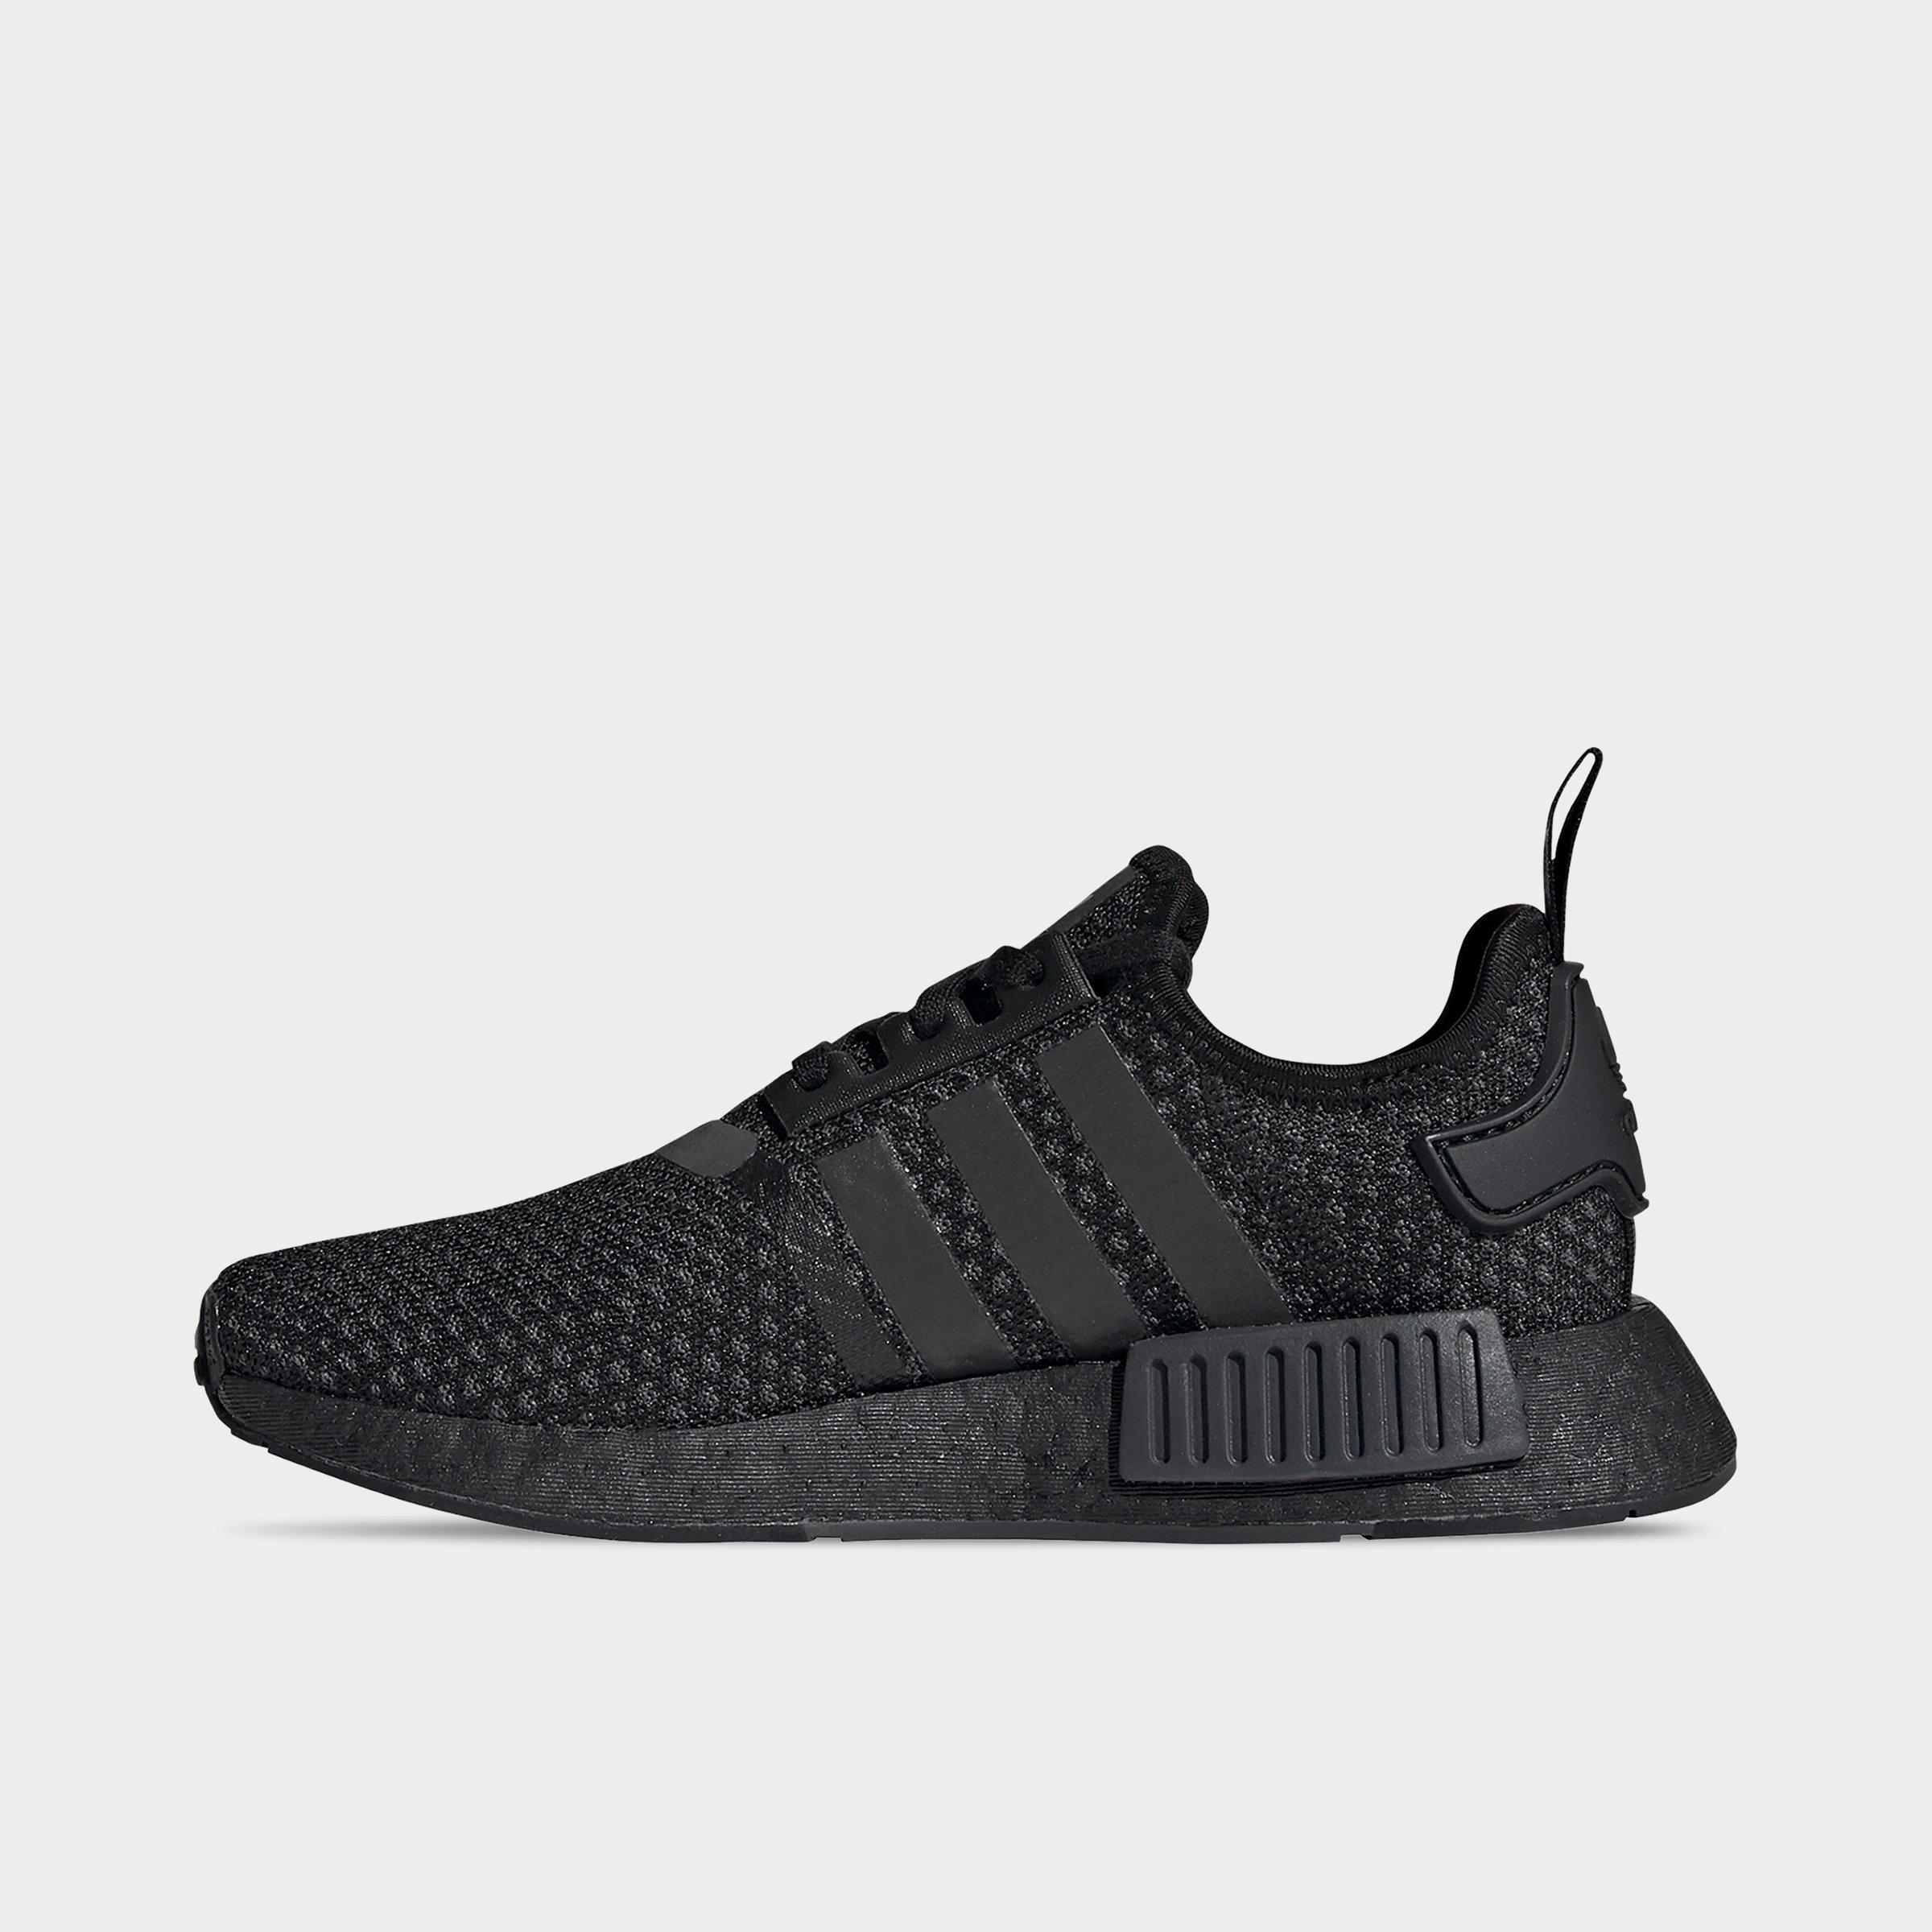 nmd size 3.5